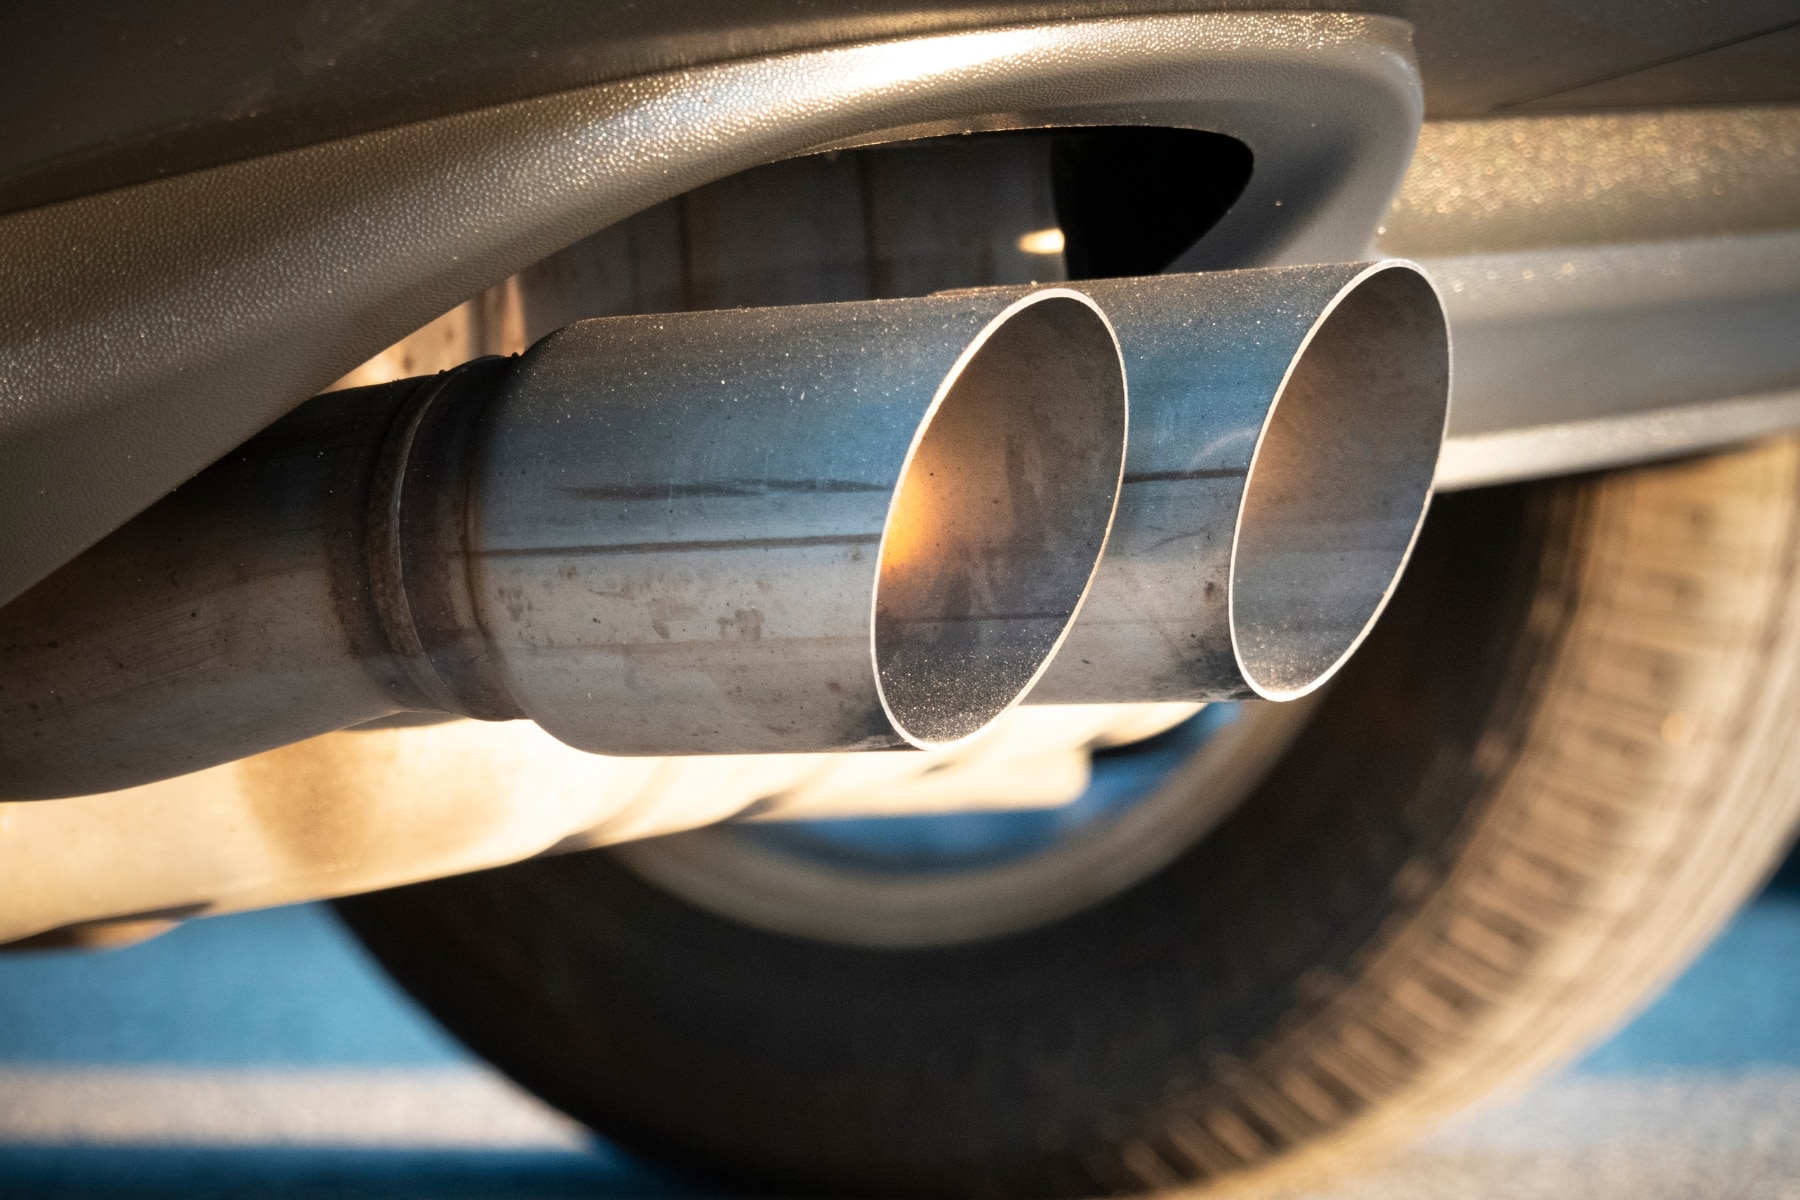 EPA Proposes Ambitious Vehicle Emissions Standards to Accelerate Clean Vehicles Transition